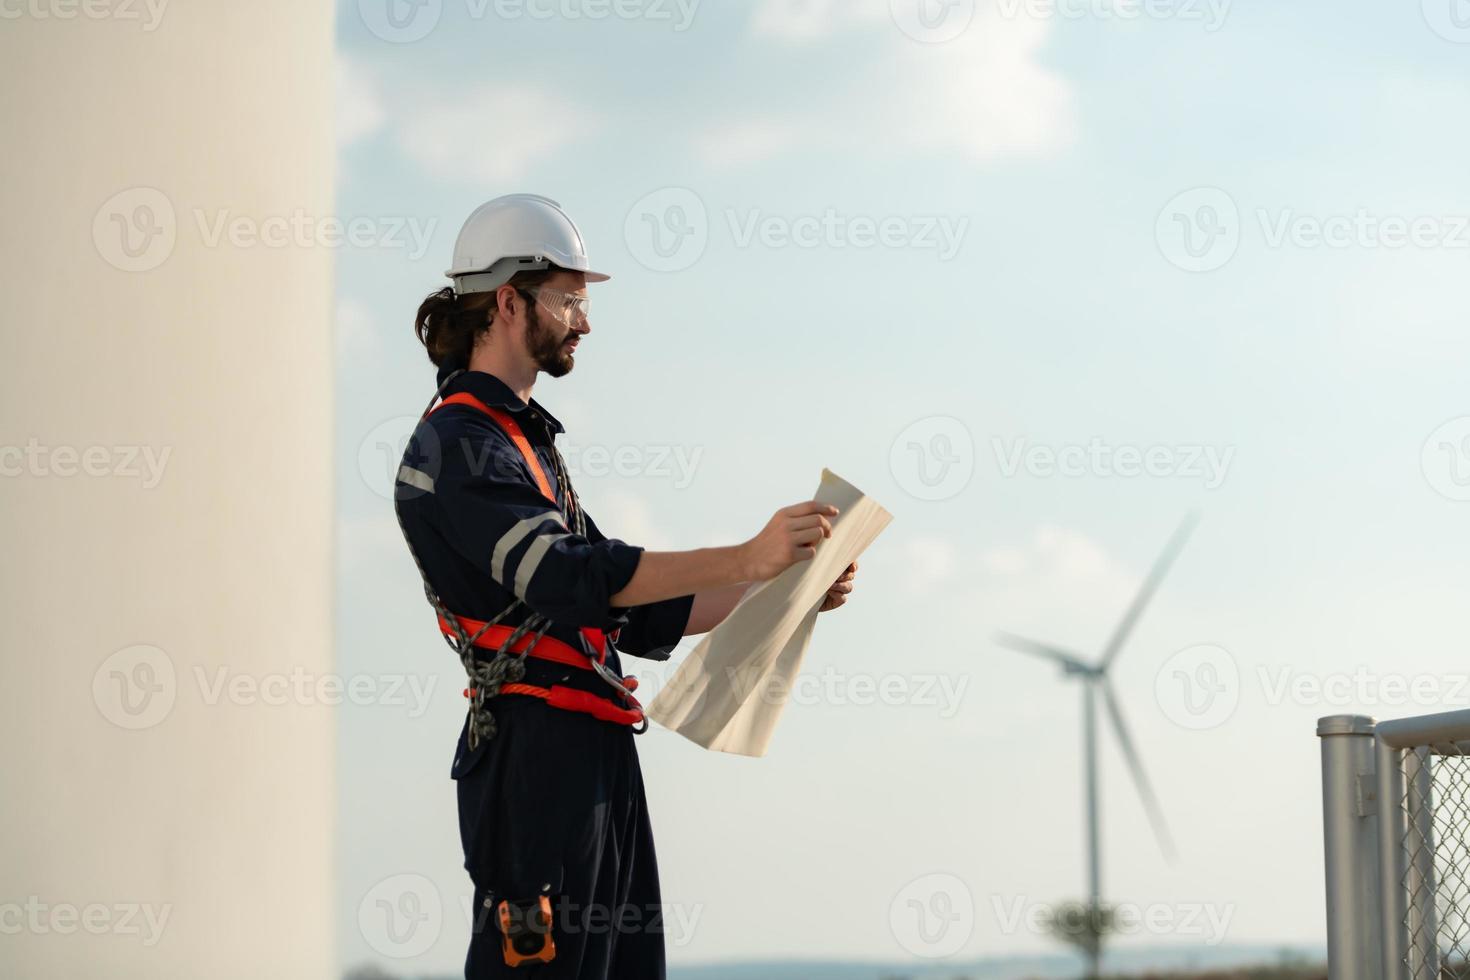 Engineer at Natural Energy Wind Turbine site with a mission to climb up to the wind turbine blades to inspect the operation of large wind turbines that converts wind energy into electrical energy photo